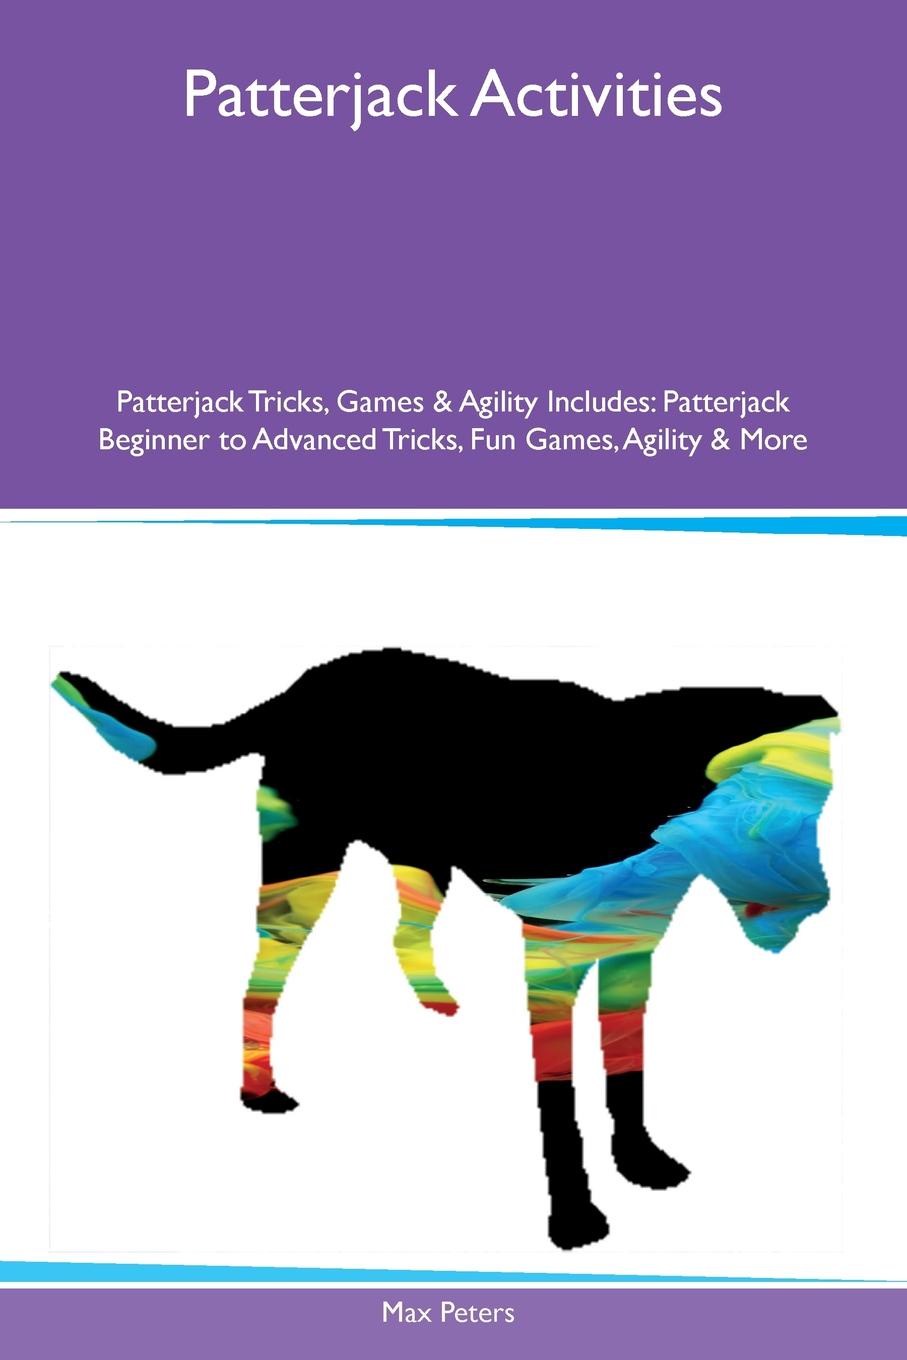 Patterjack Activities Patterjack Tricks, Games & Agility Includes. Patterjack Beginner to Advanced Tricks, Fun Games, Agility & More